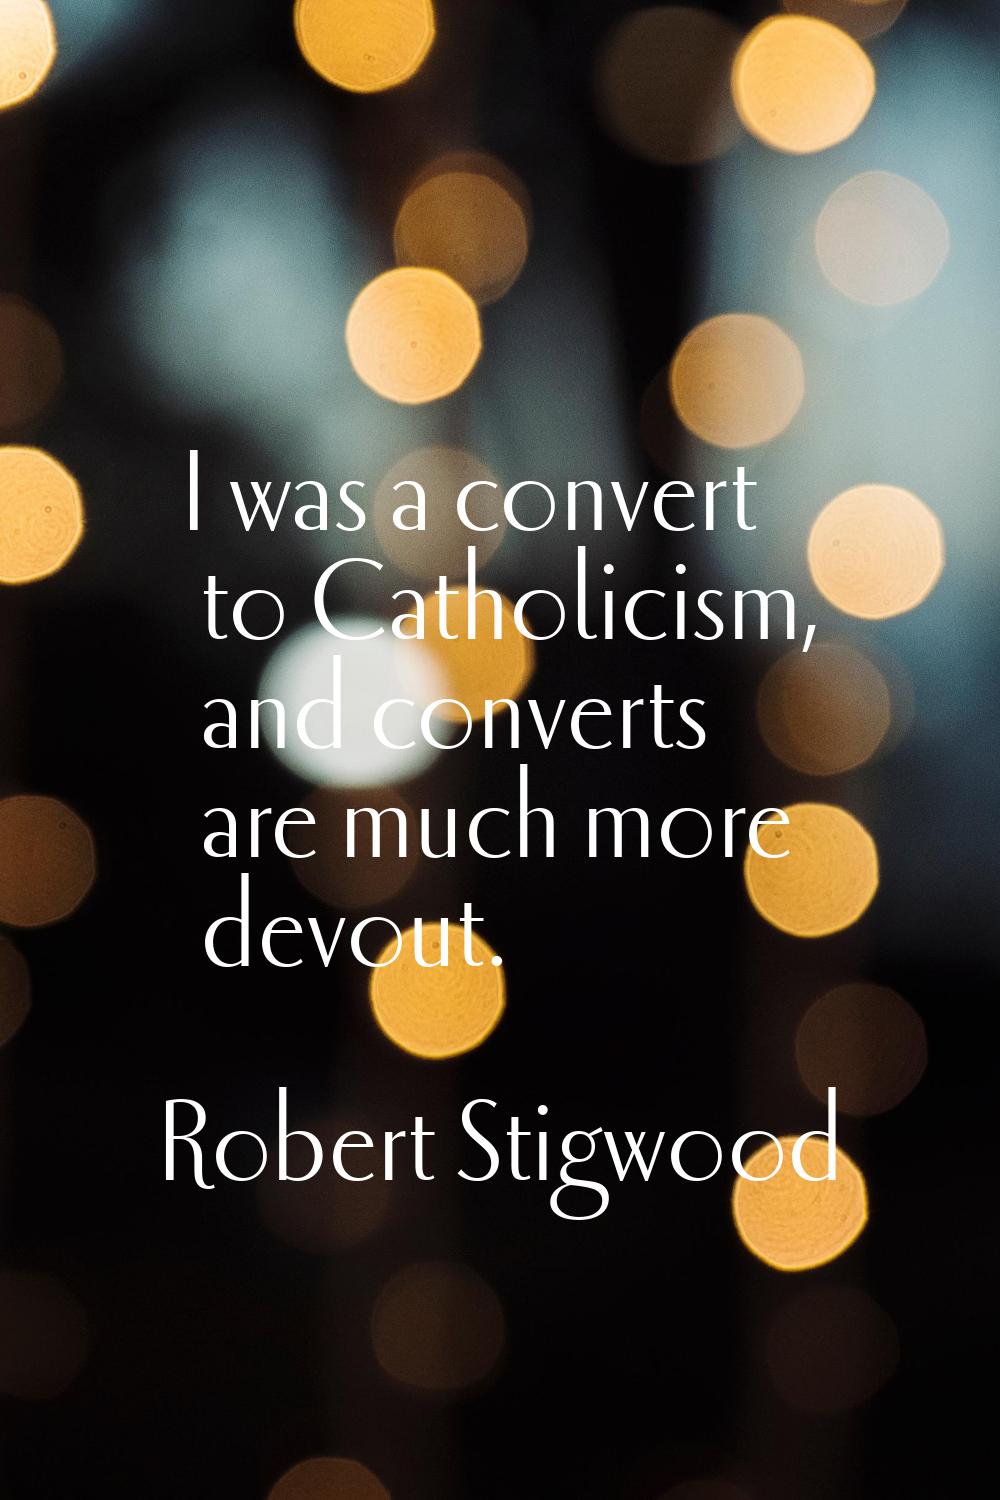 I was a convert to Catholicism, and converts are much more devout.